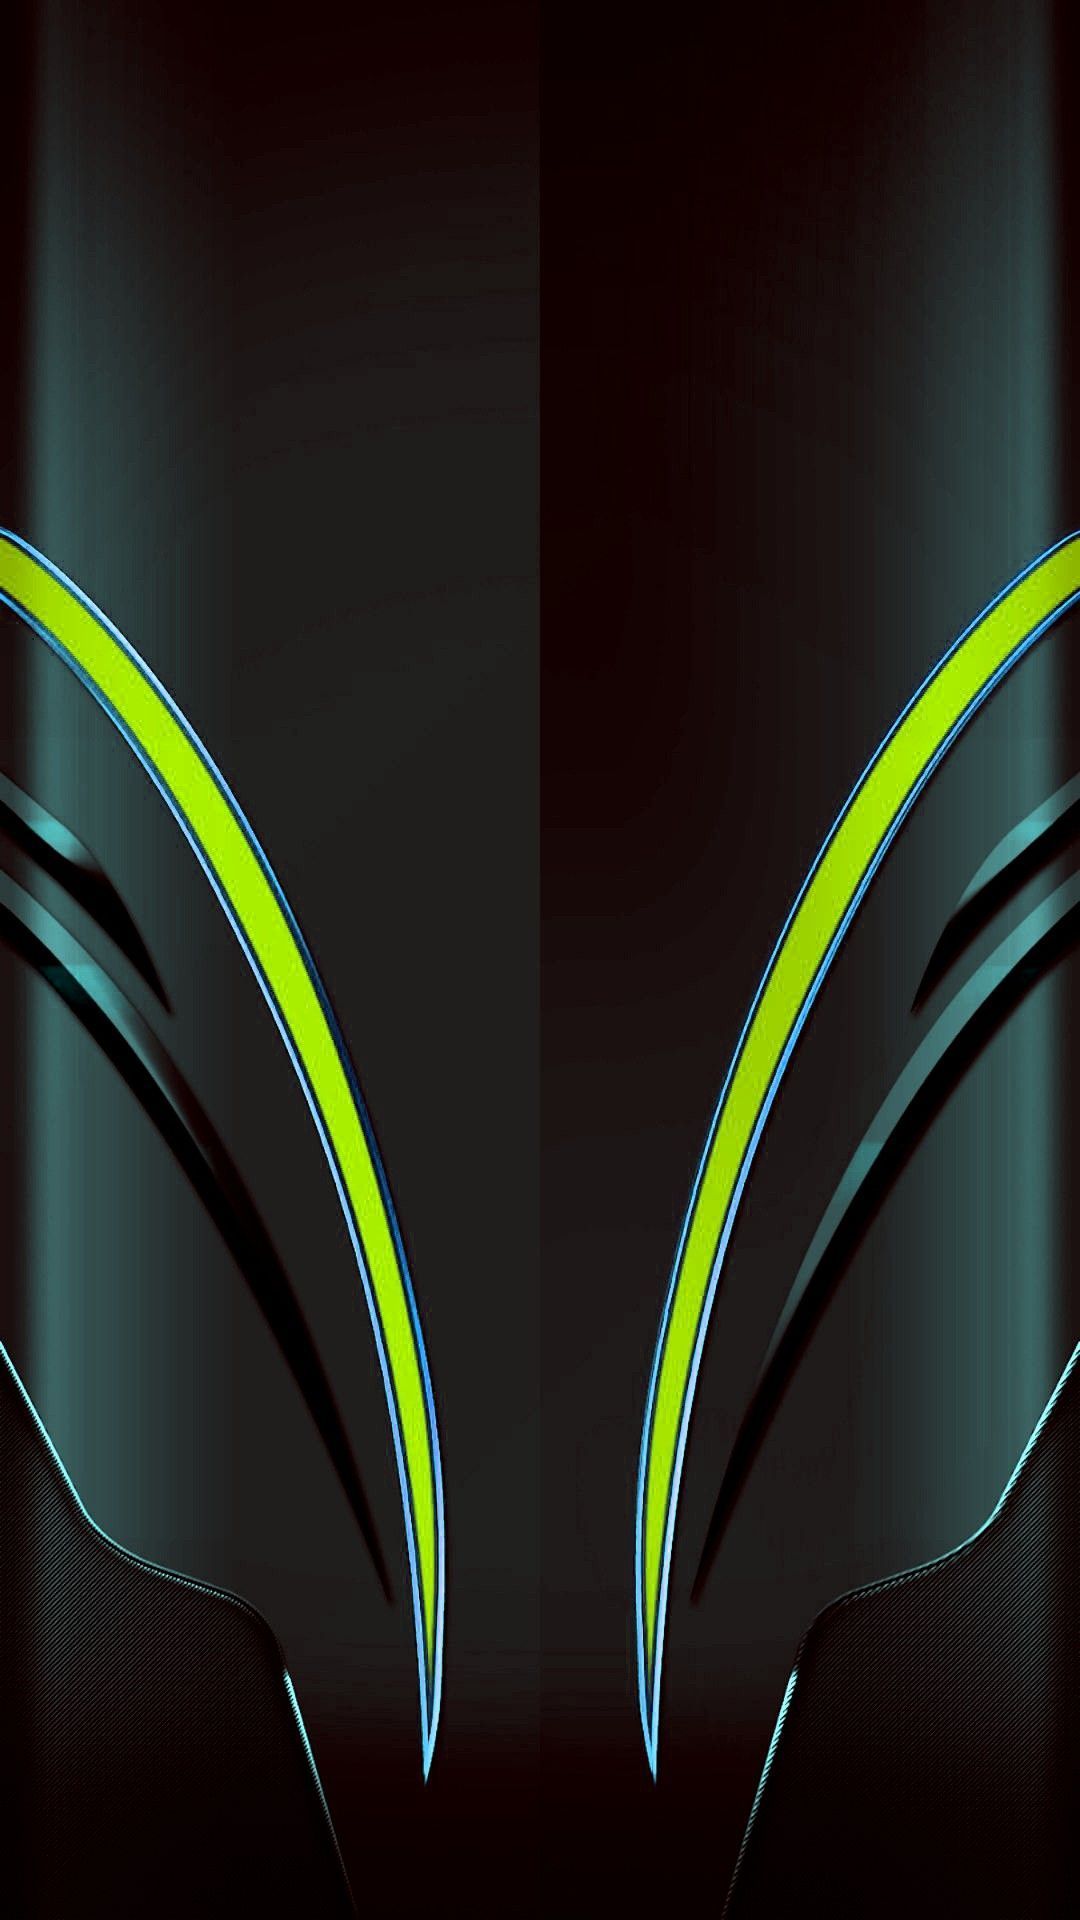 ✓ [110+] Neon Abstract - Android, iPhone, Desktop HD Backgrounds /  Wallpapers (1080p, 4k) (2023)